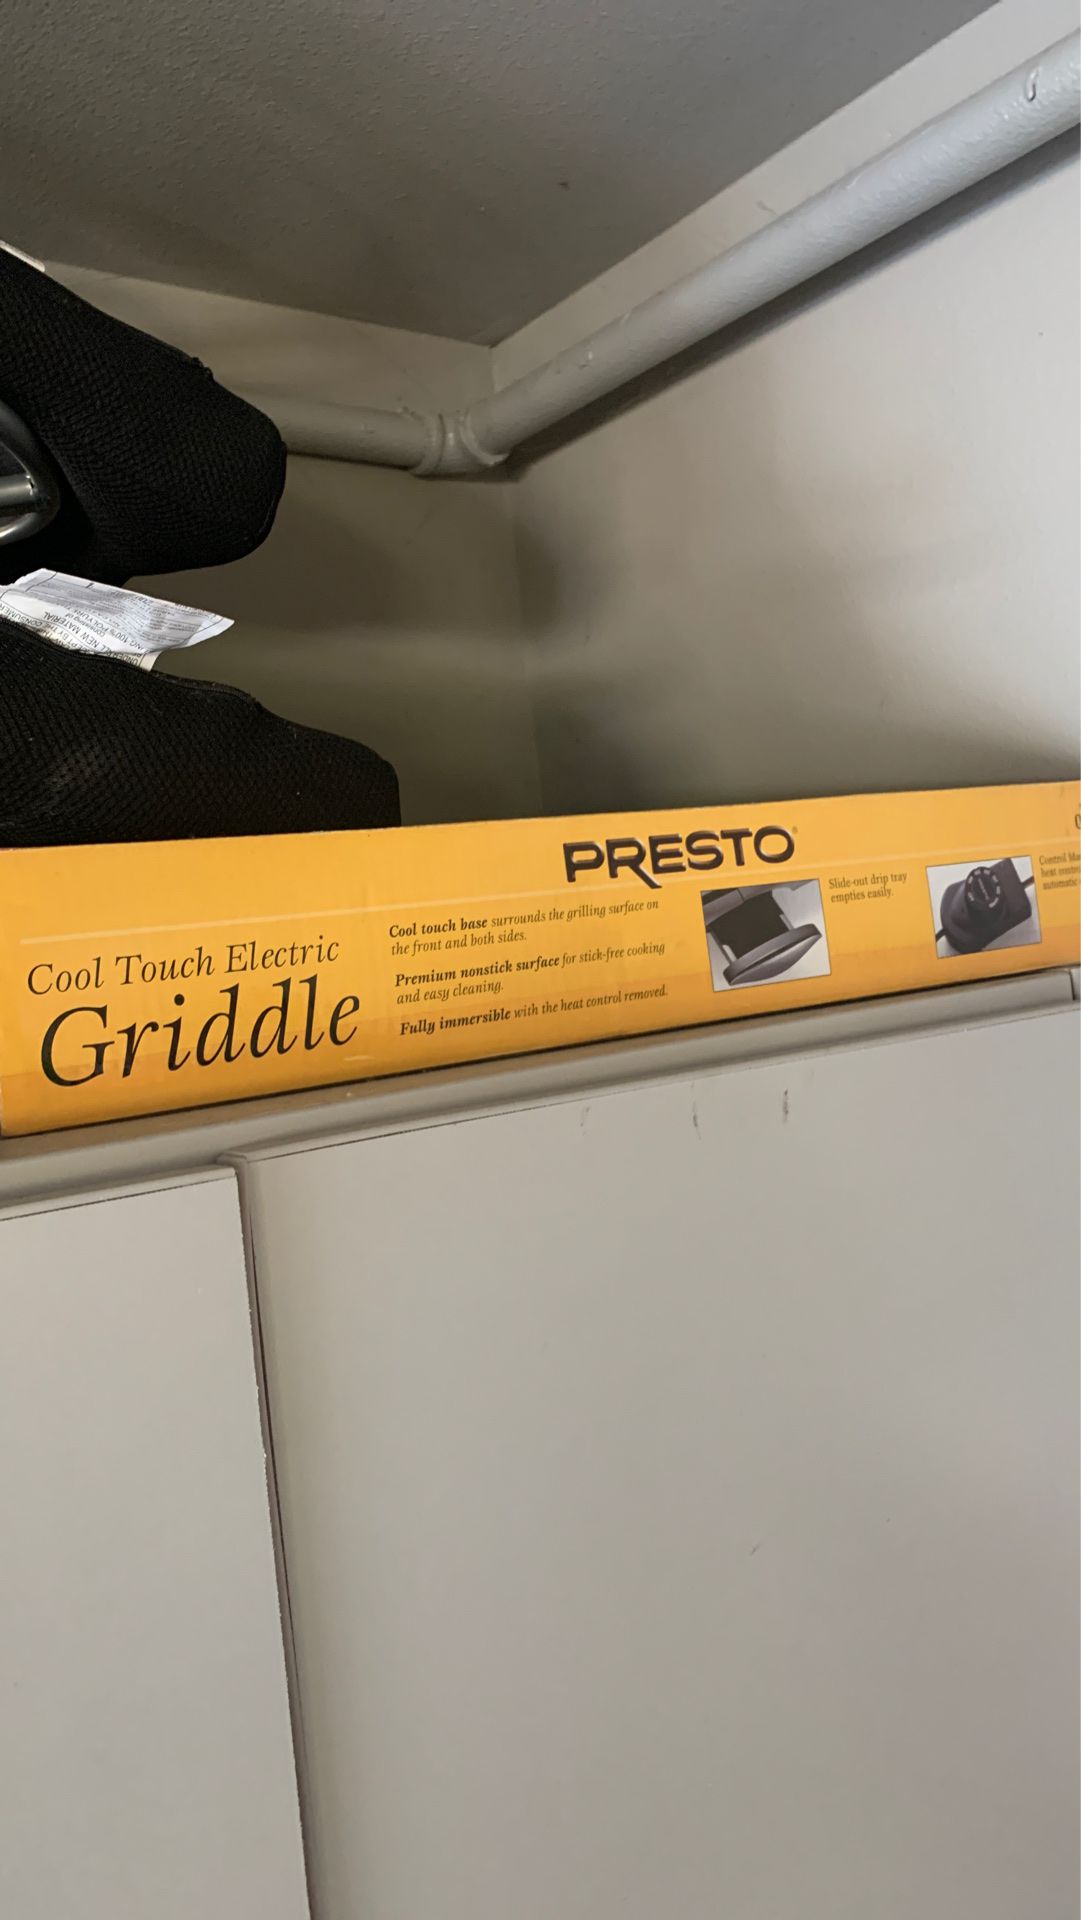 NEW: Presto cool touch electric griddle